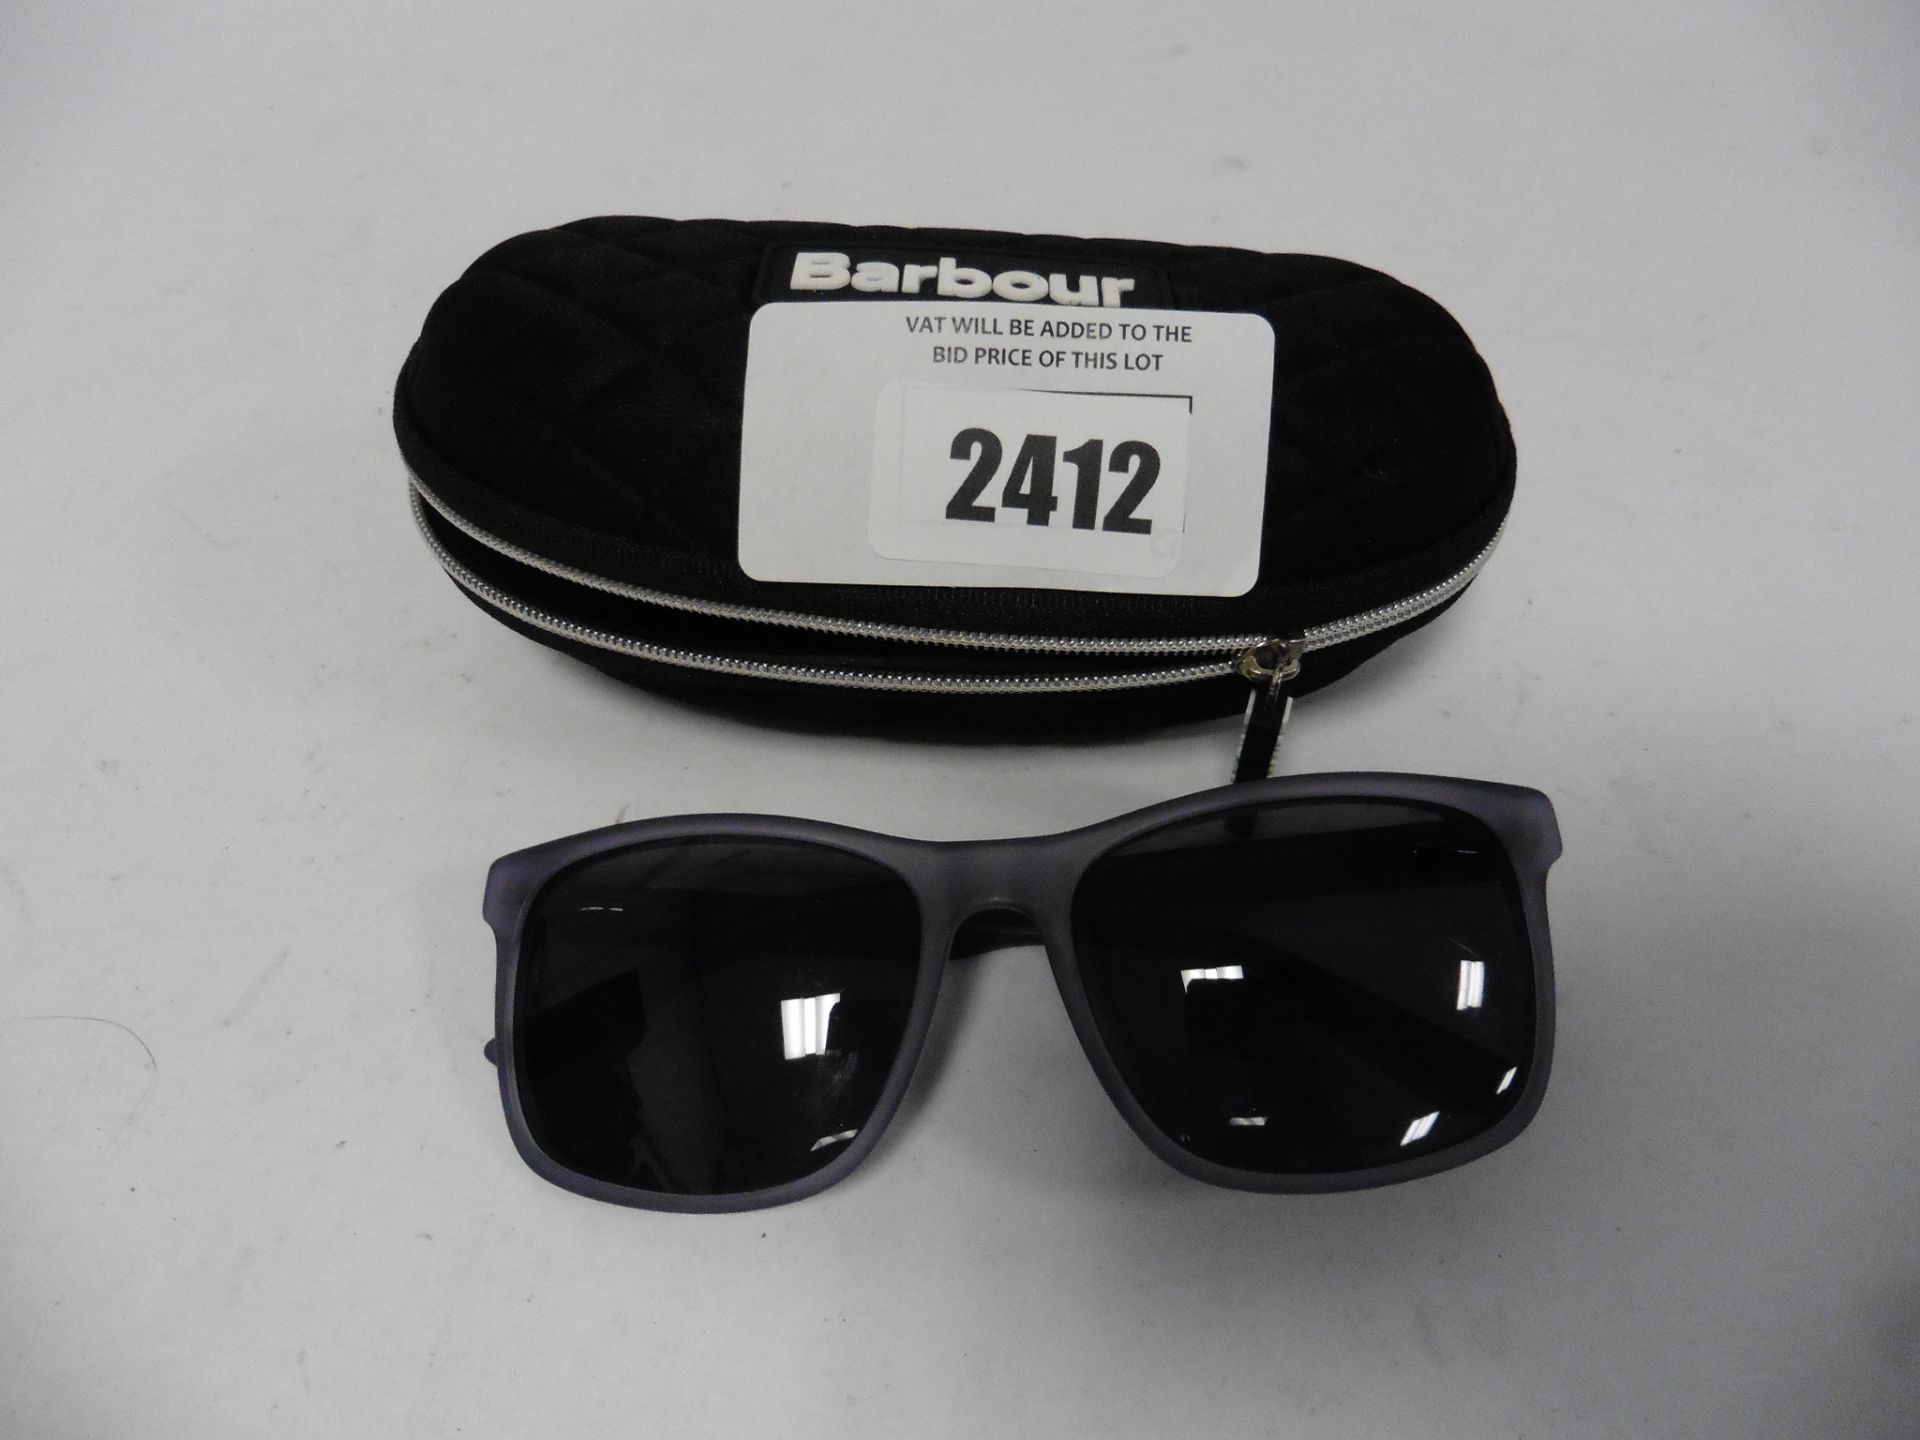 Pair Barbour Polarized sunglasses with case